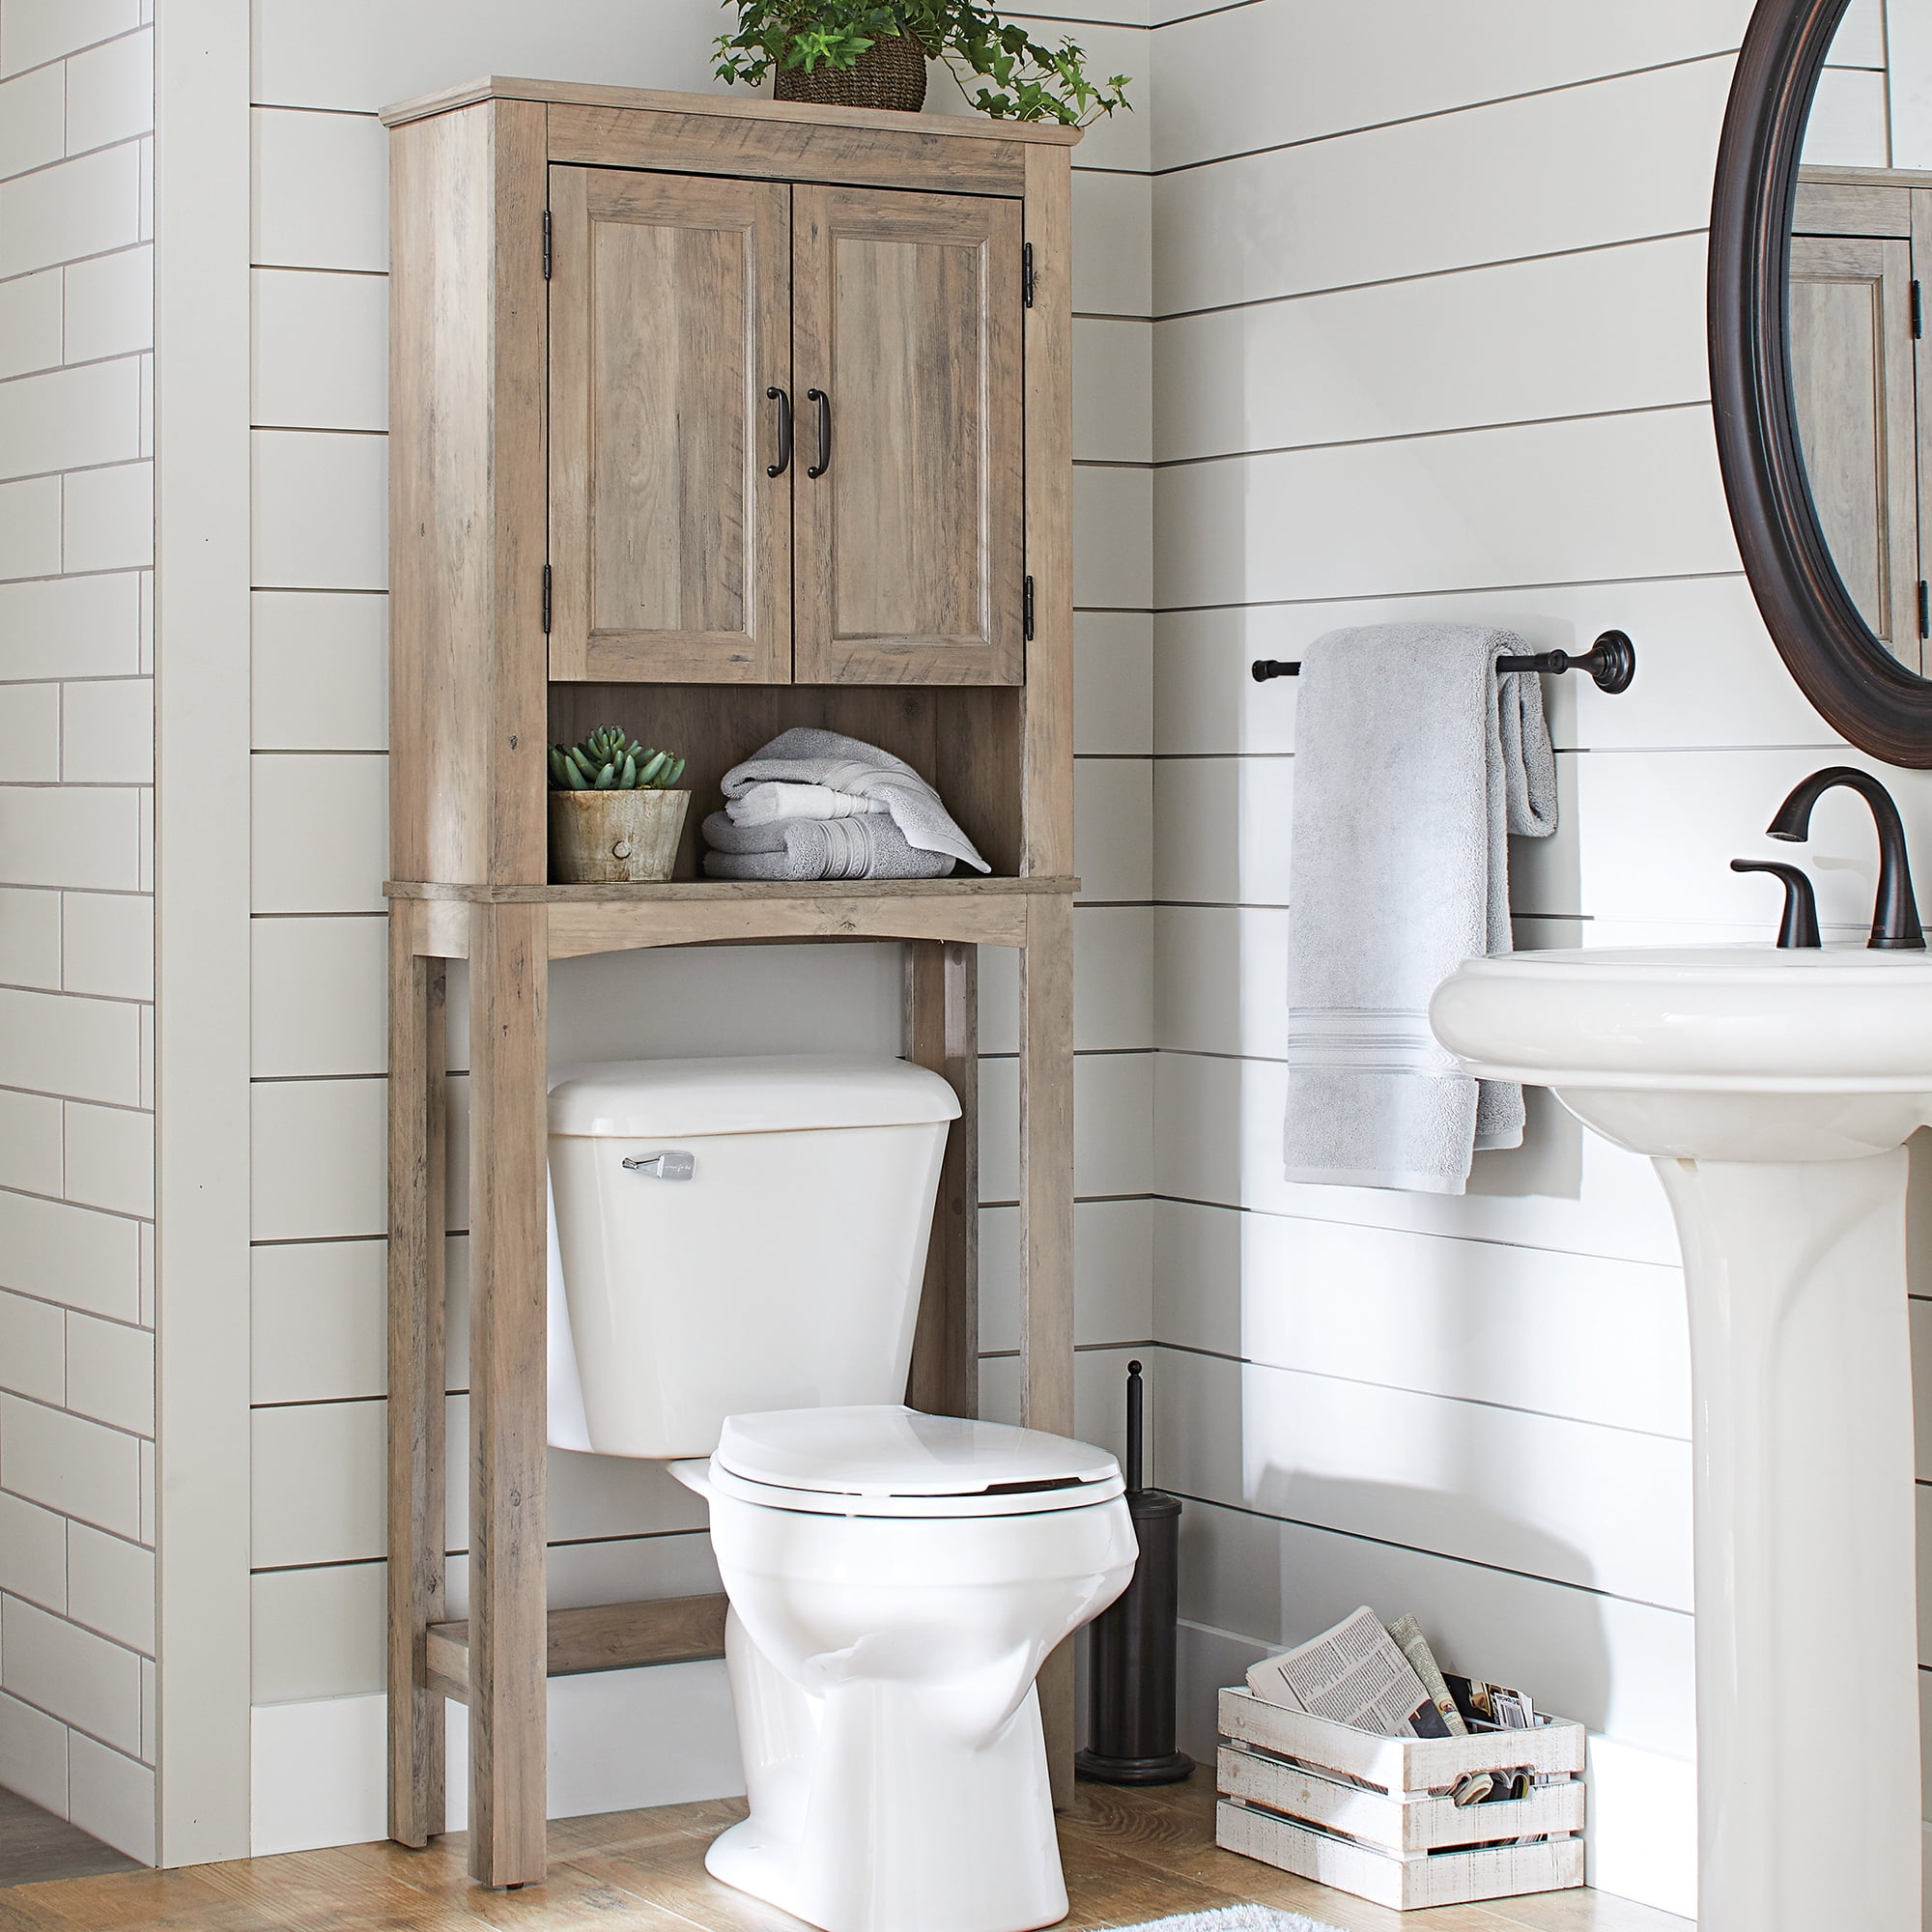 OVER THE TOILET Storage Organizer Bathroom Space Saver Wood Cabinet Cube Shelves 